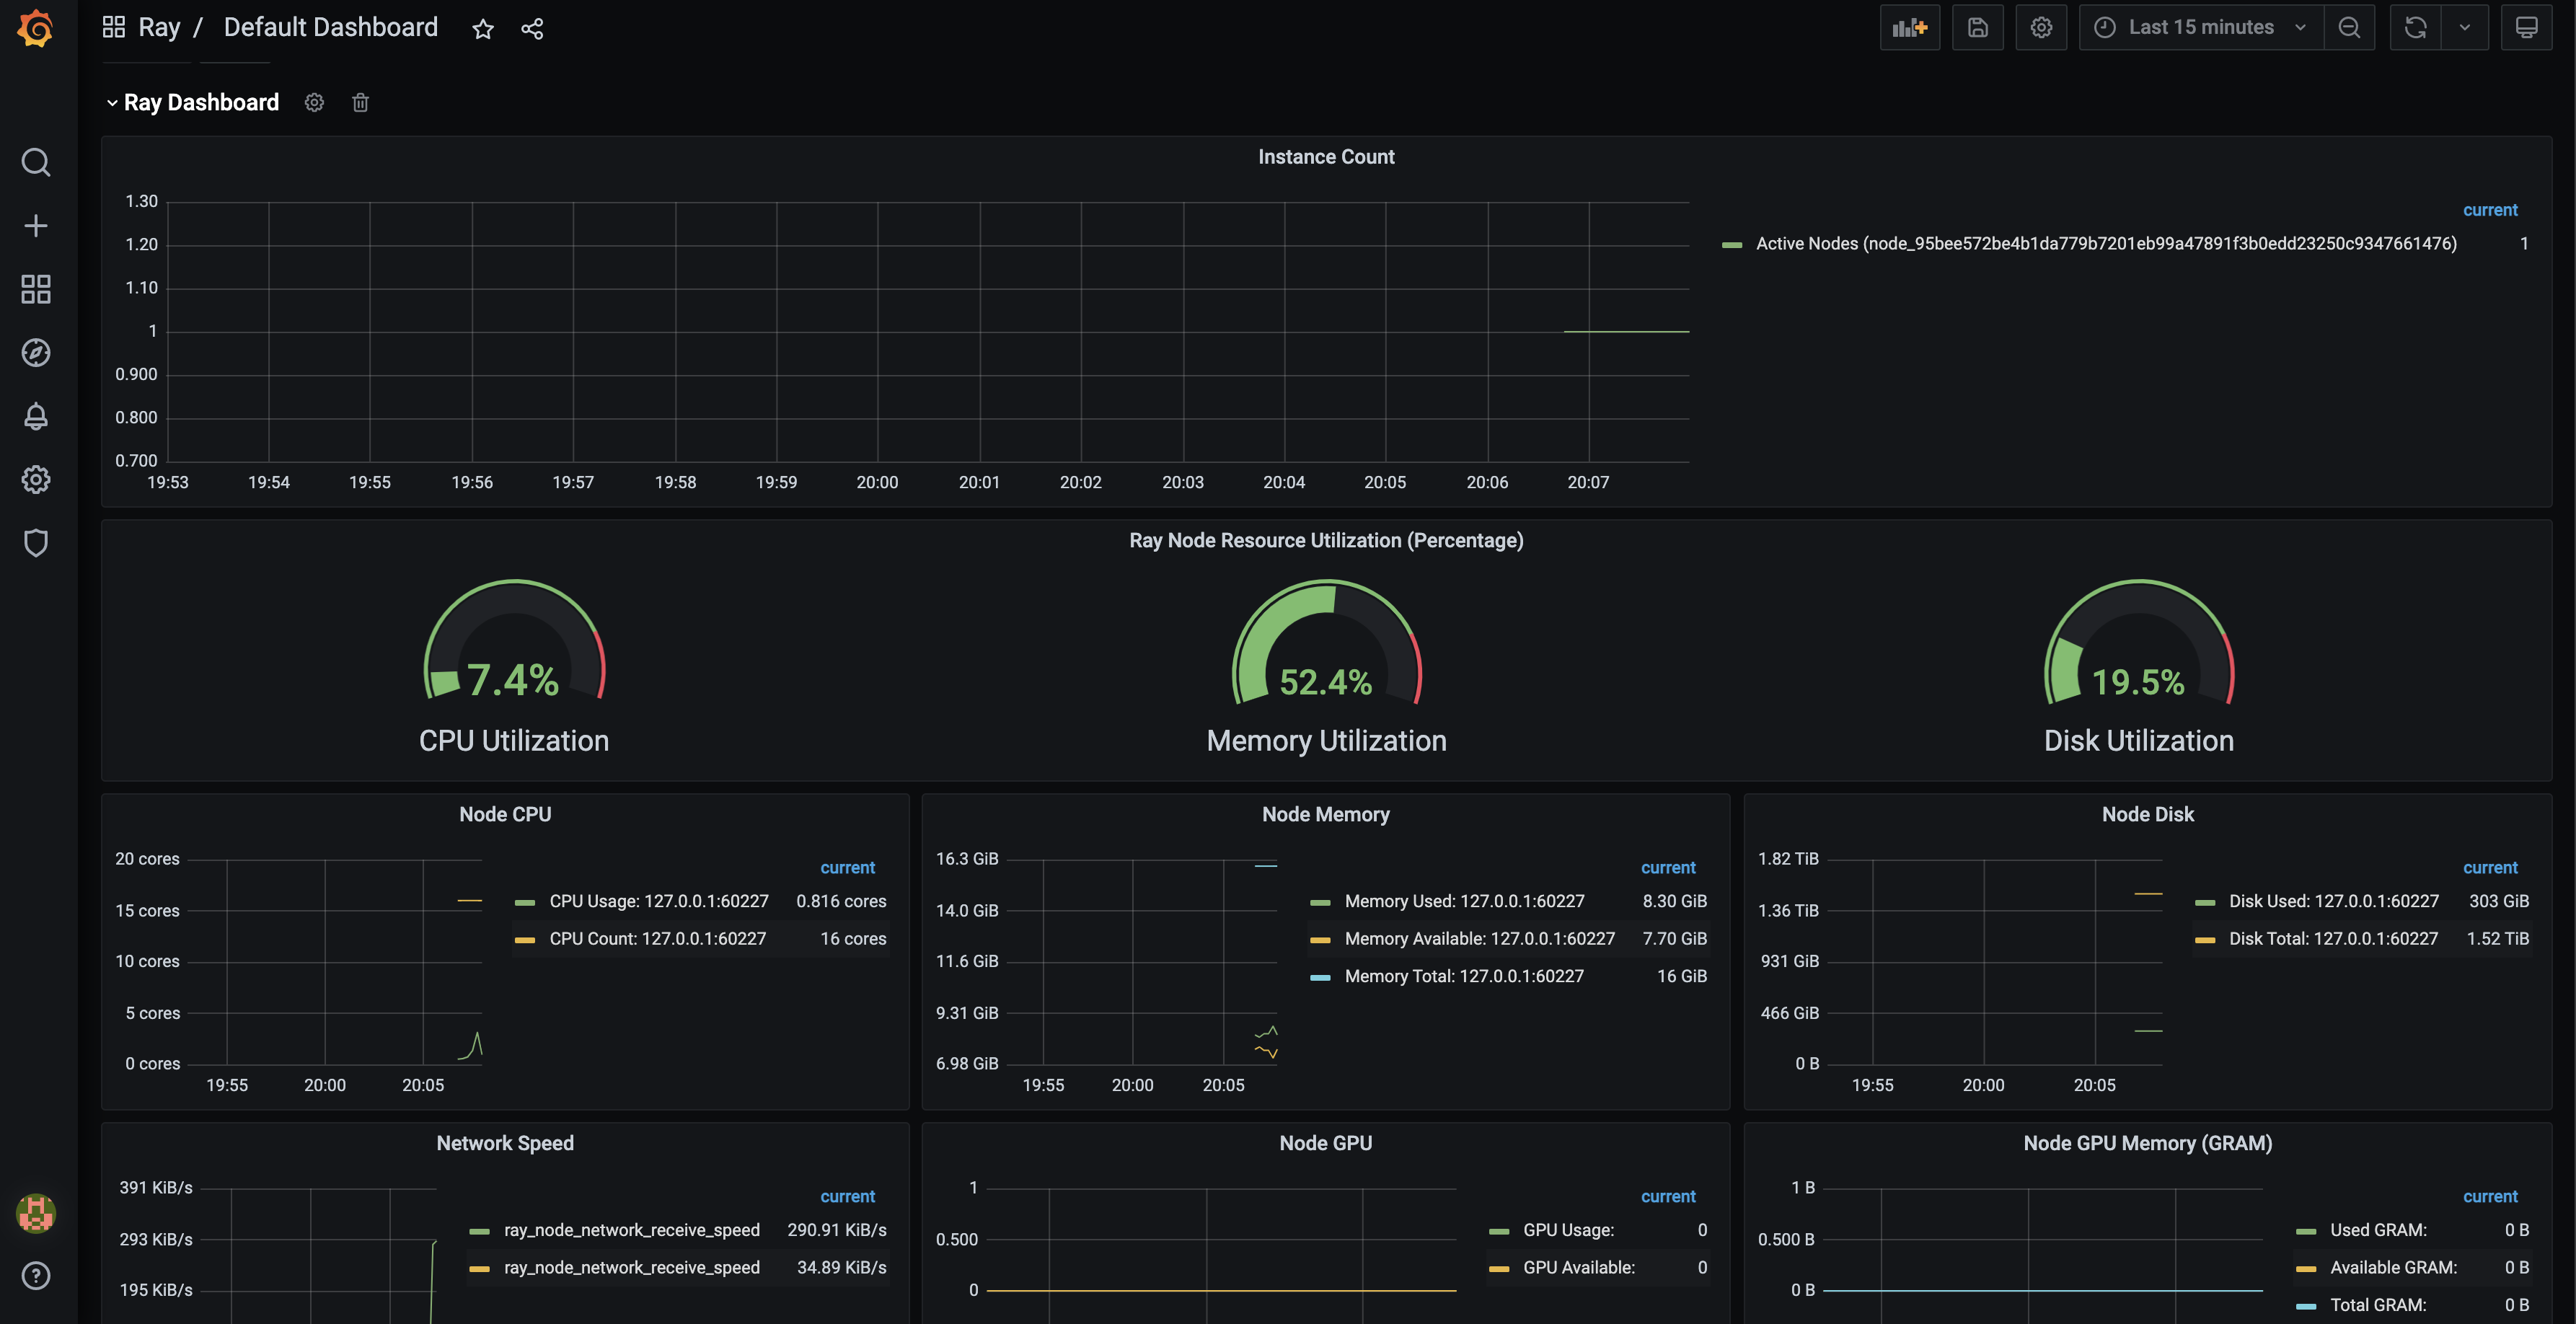 https://raw.githubusercontent.com/ray-project/Images/master/docs/new-dashboard/default_grafana_dashboard.png